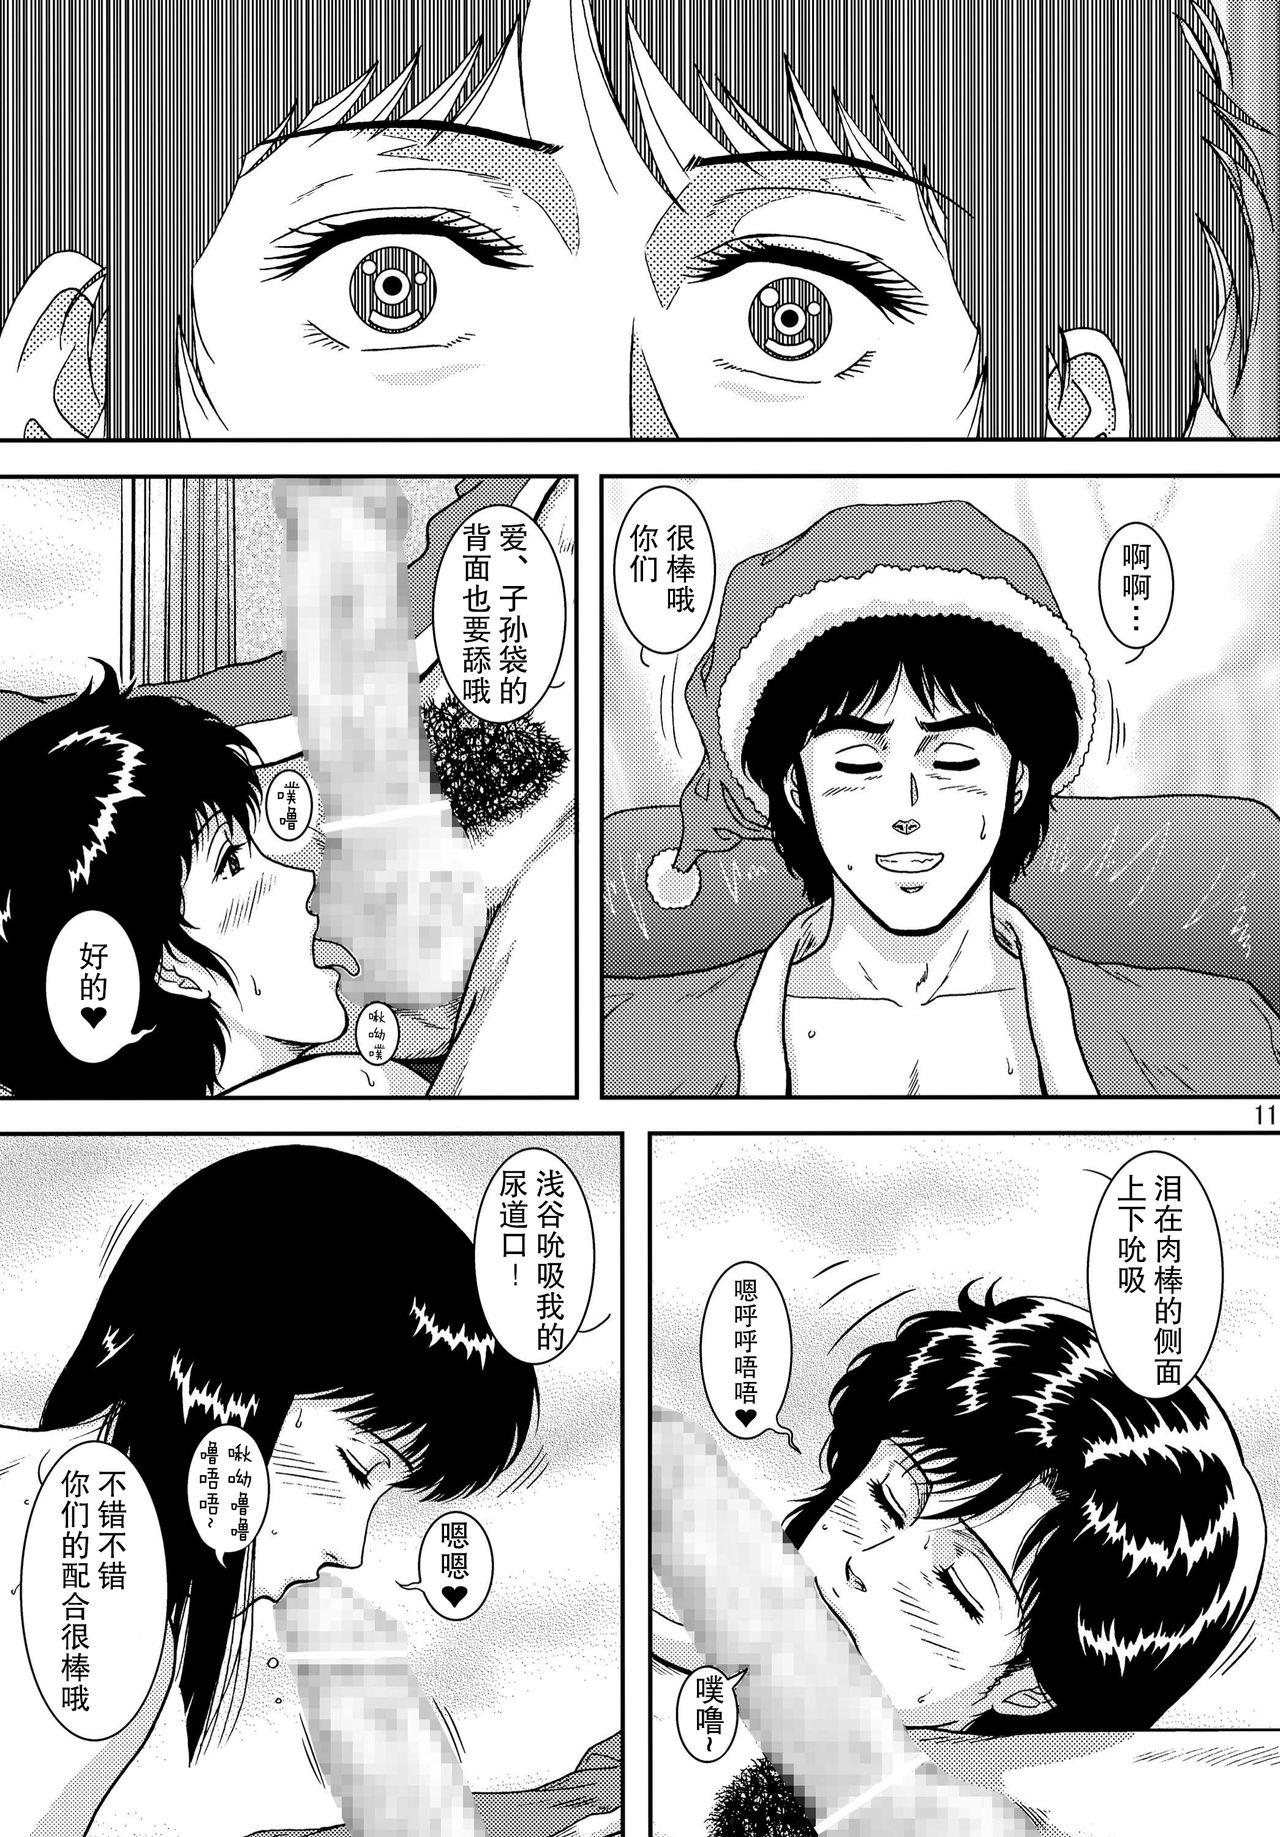 Rabo NIGHTFLY vol.10 PLEASE COME HOME for X'mas - Cats eye Straight - Page 11